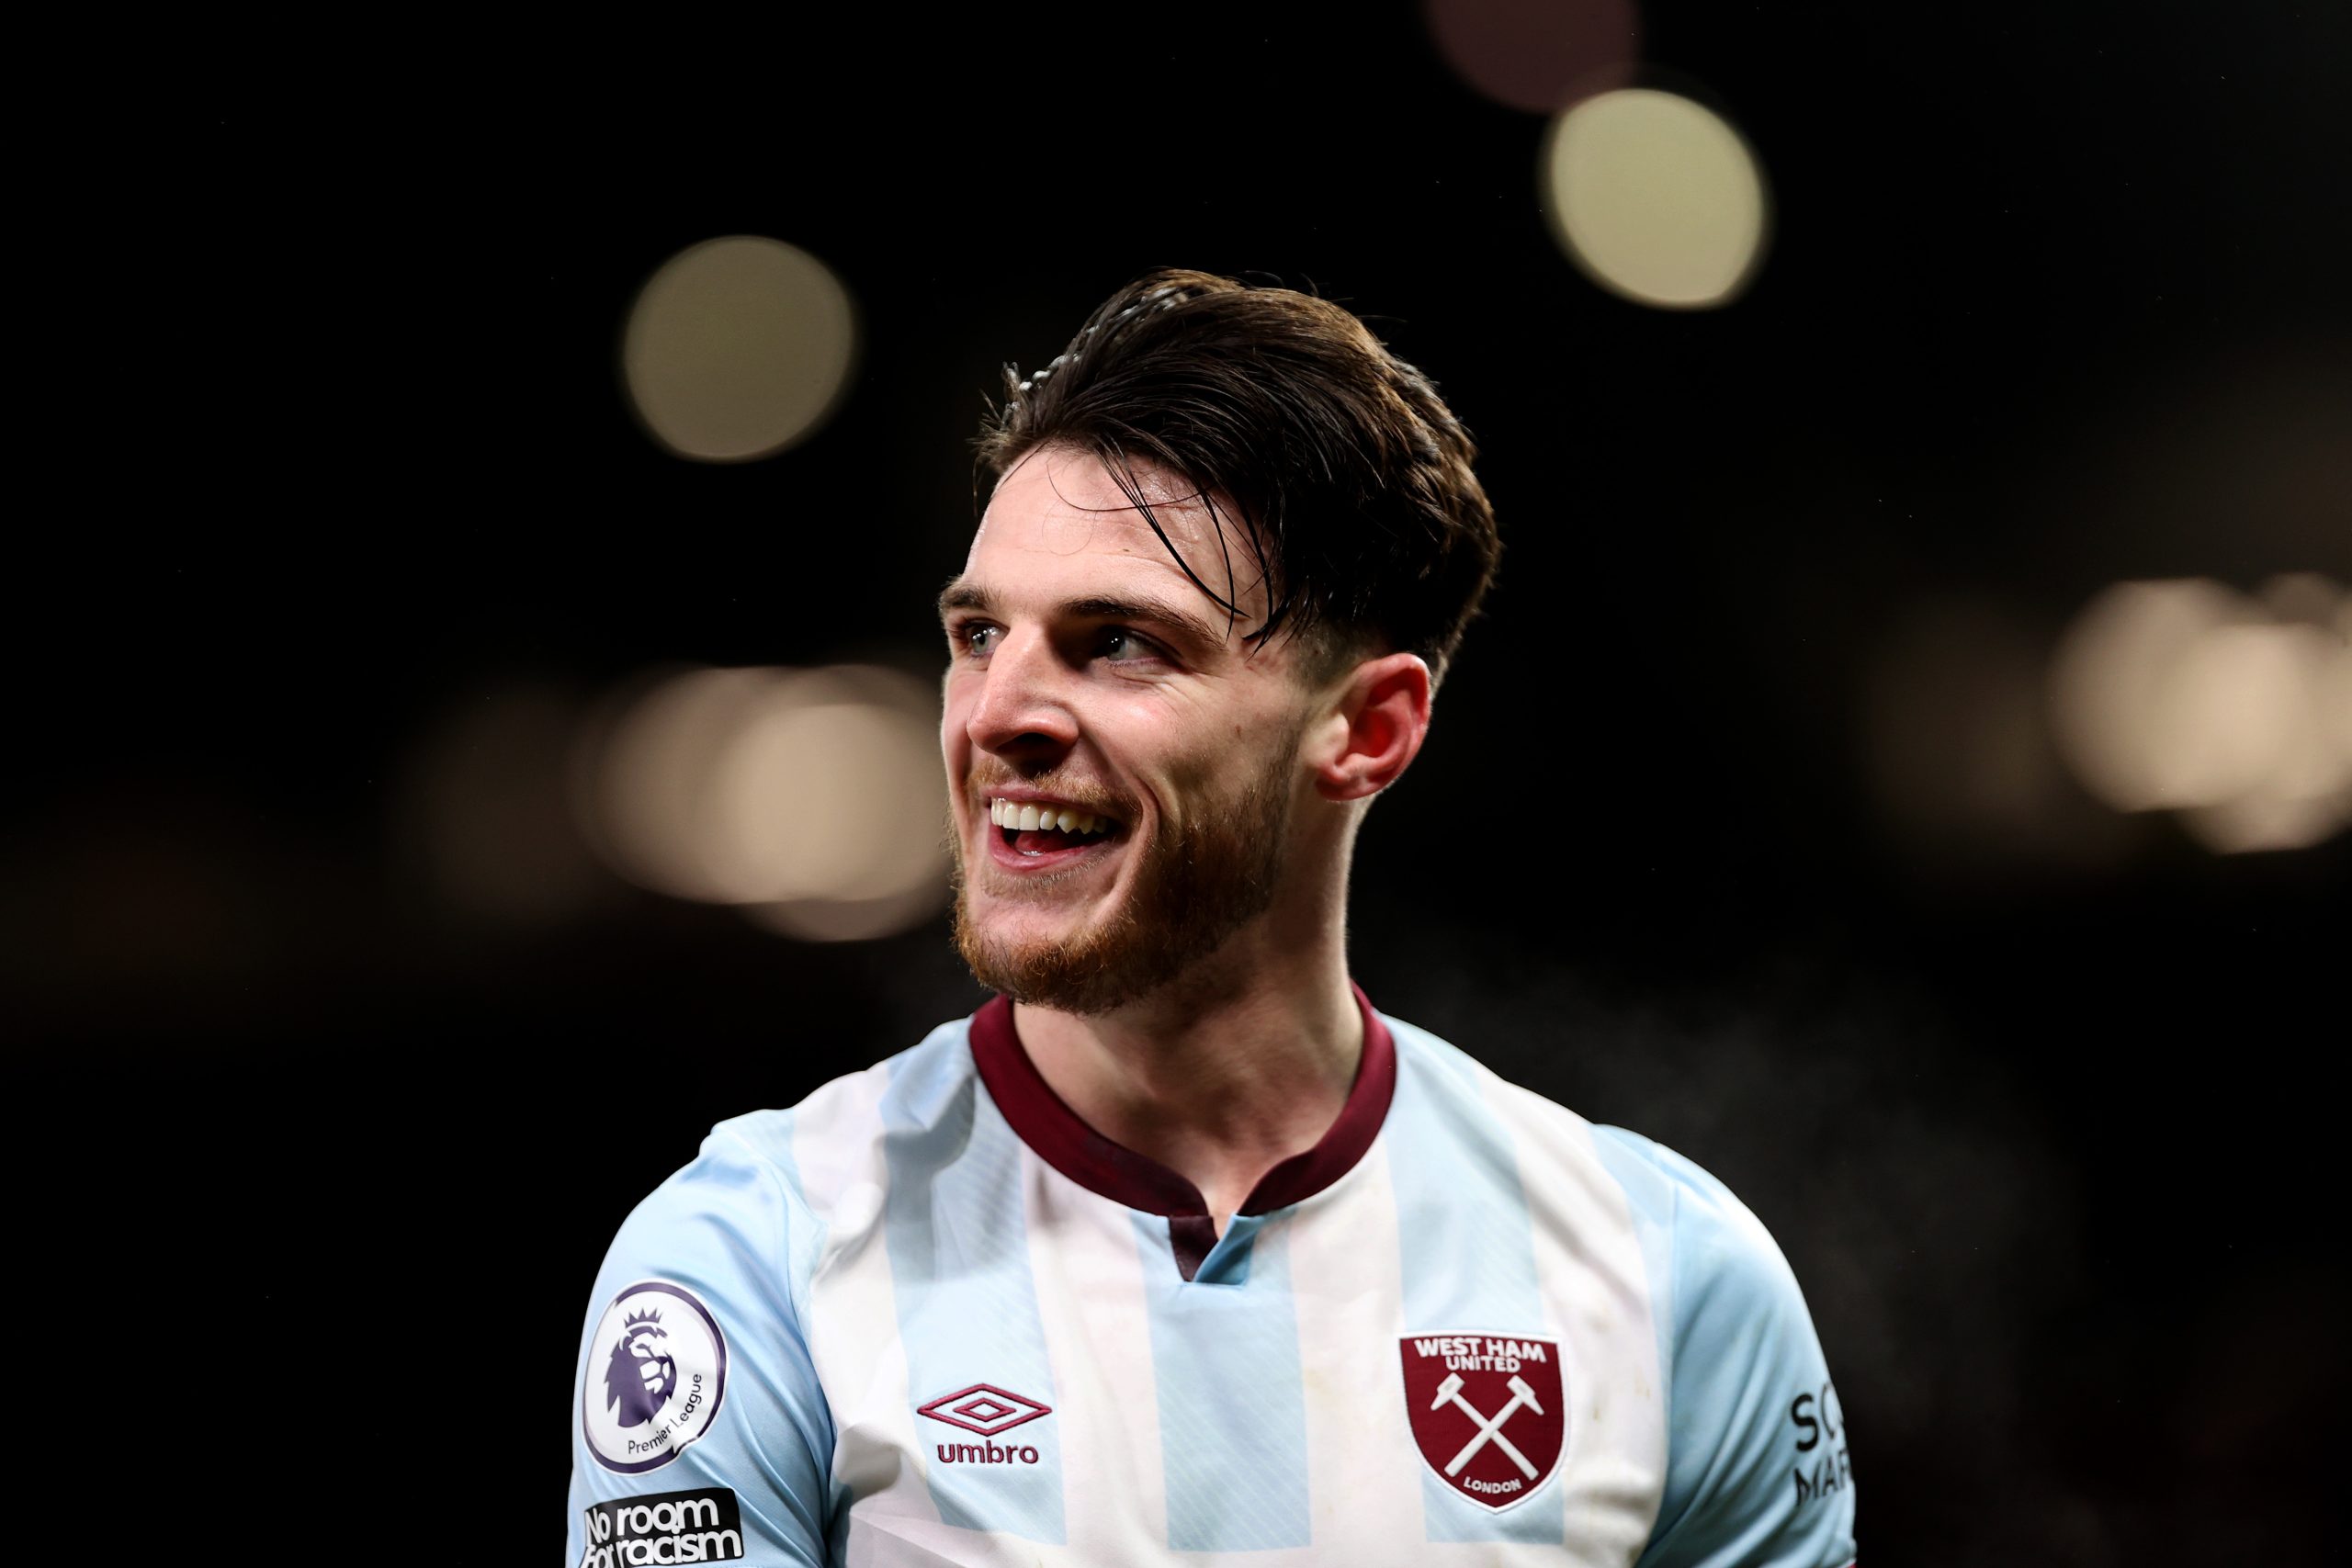 West Ham United make a lucrative new contract offer to Chelsea target Declan Rice.